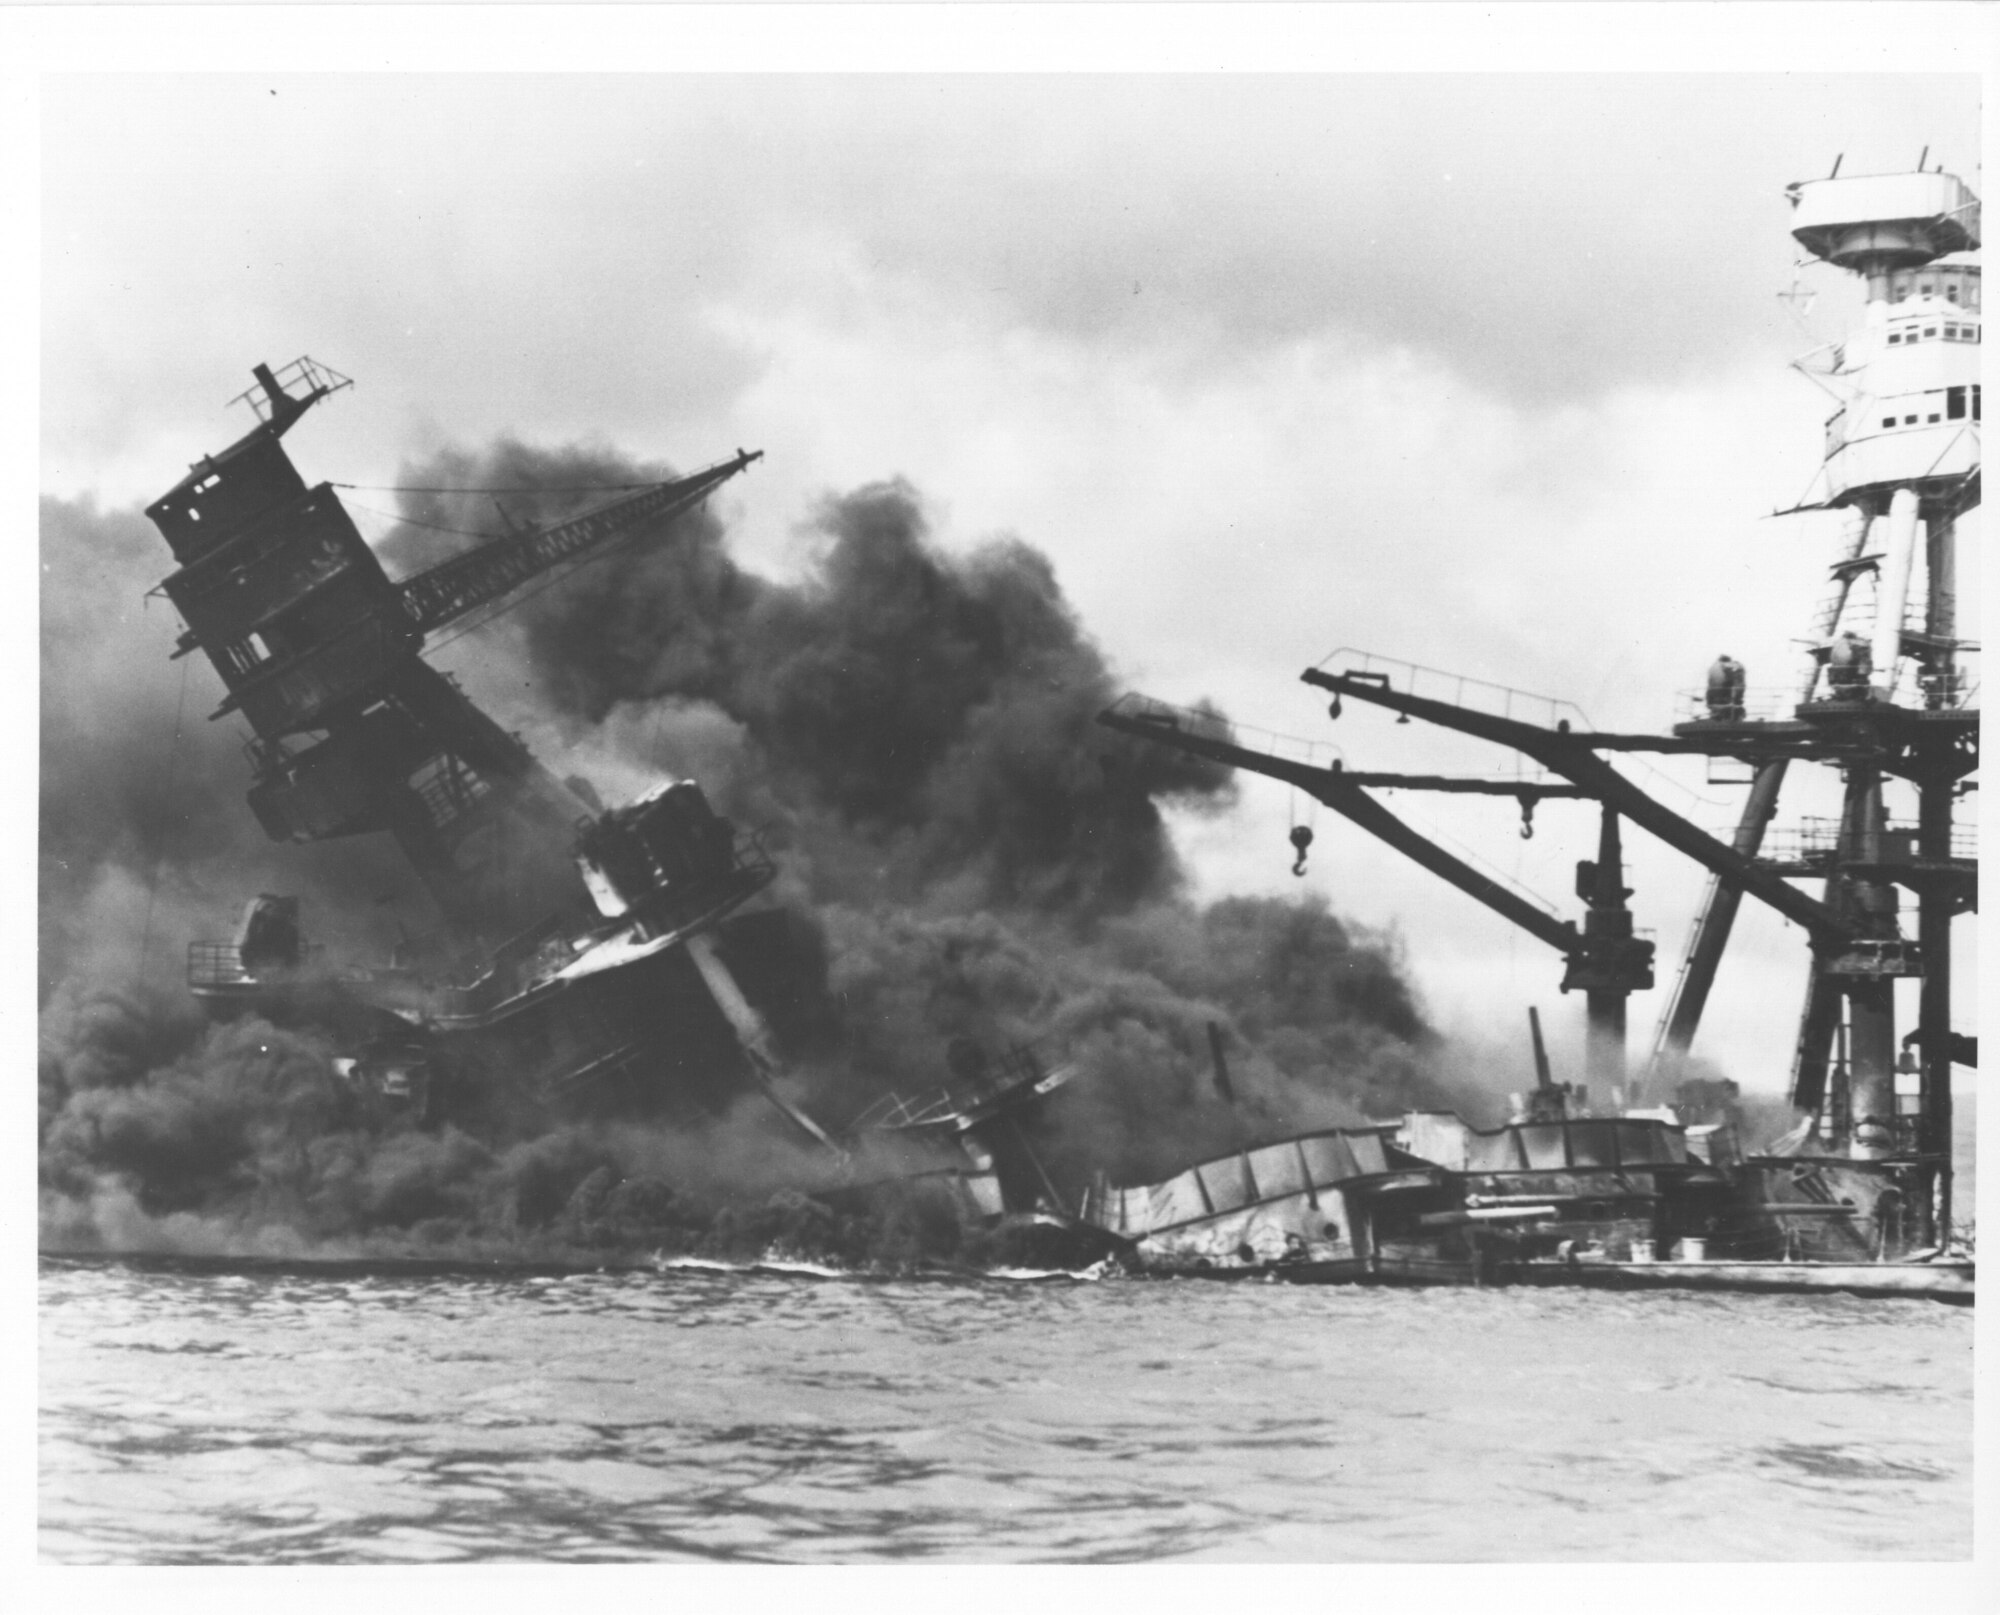 Original caption: Burning and damaged ships at Pearl Harbor, Dec. 7 1941. Photo courtesy of the U.S. National Archives and Records Administration.